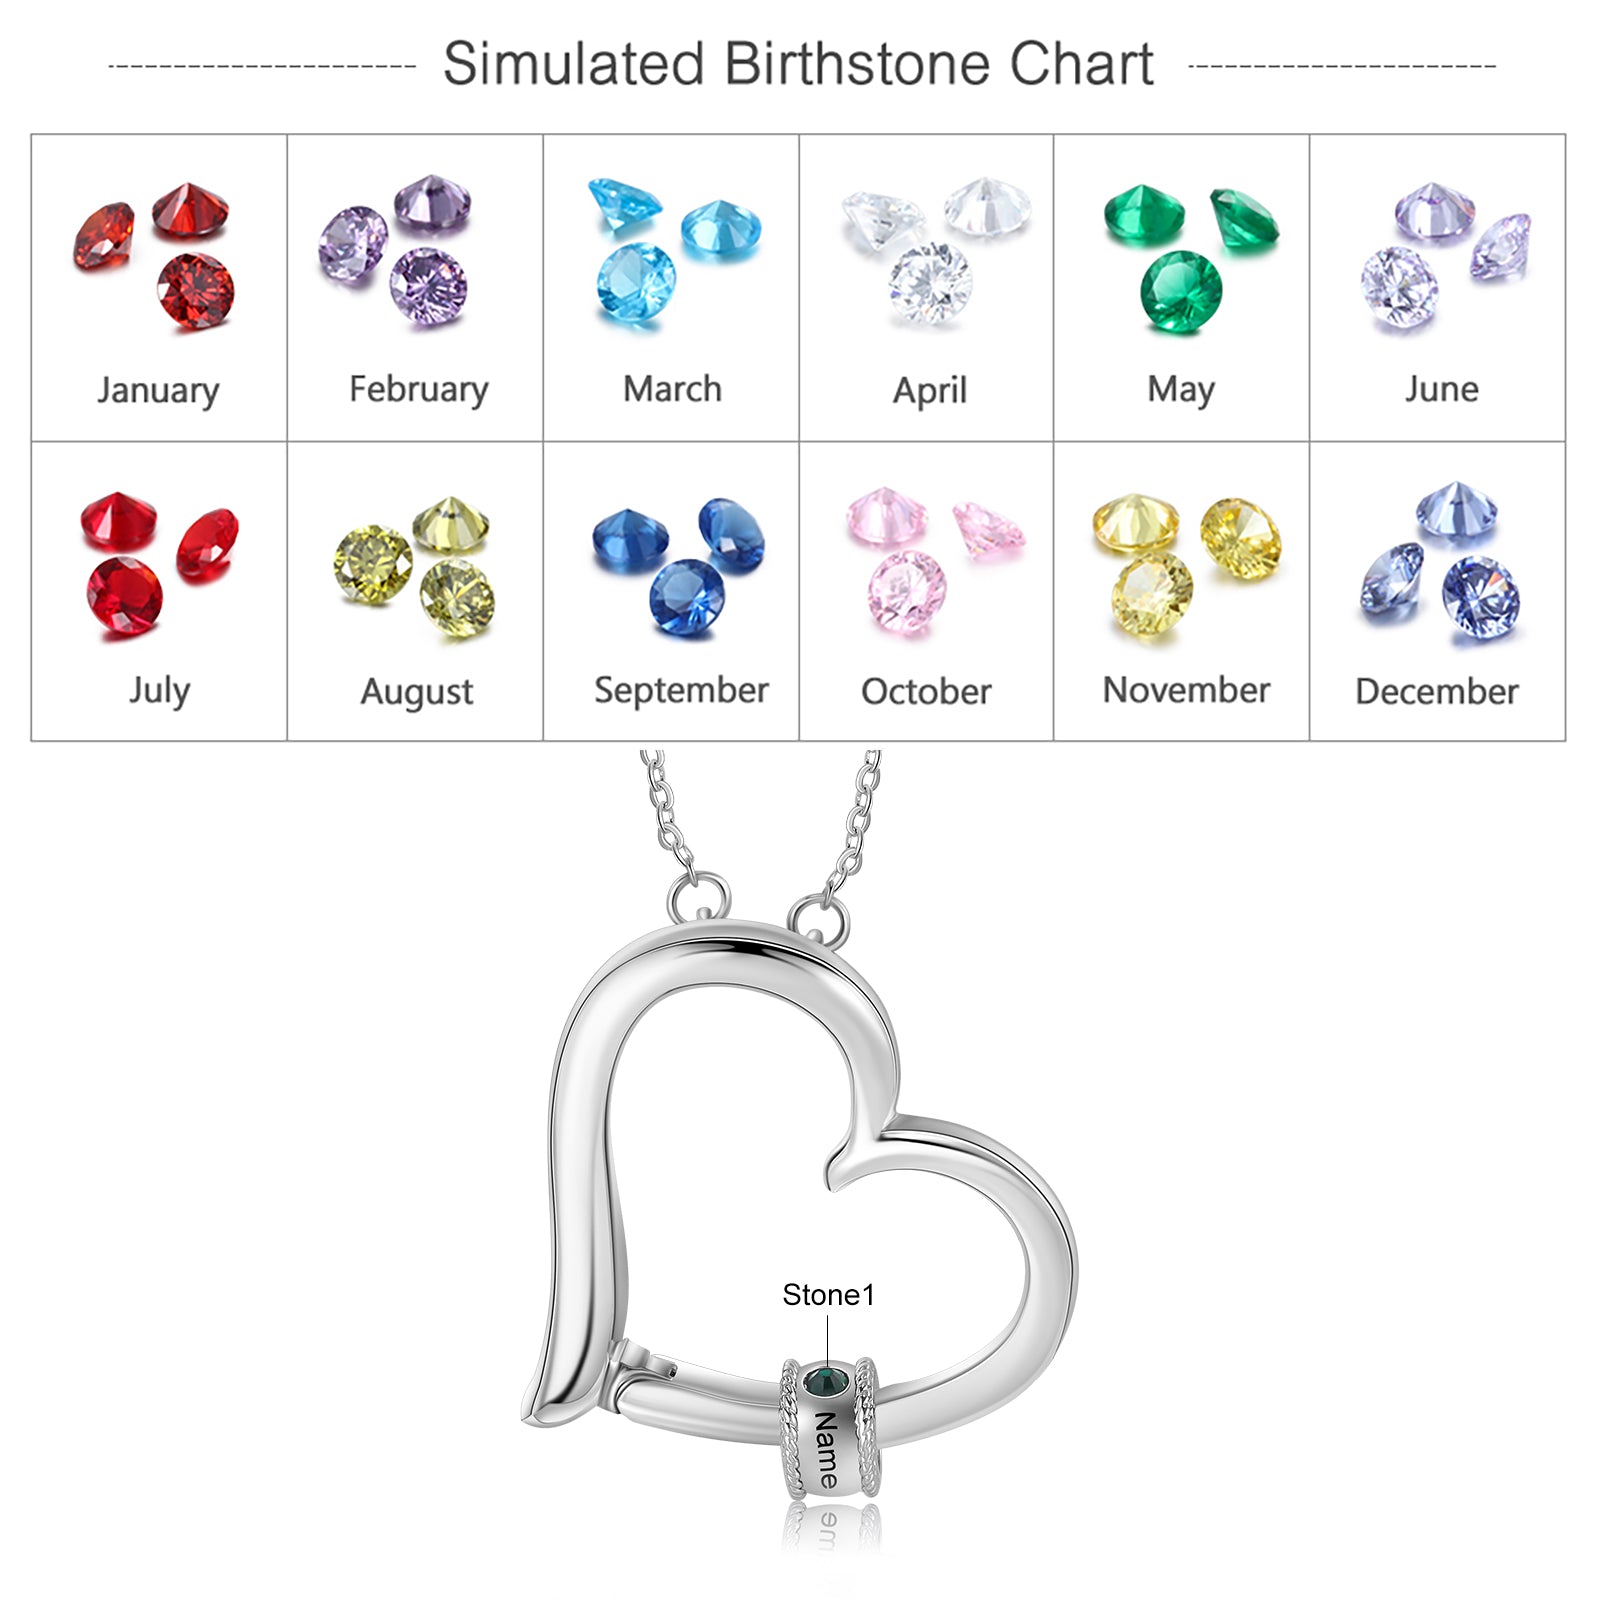 Custom Family Heart Necklace with Birthstones - Personalized Engraved Jewelry